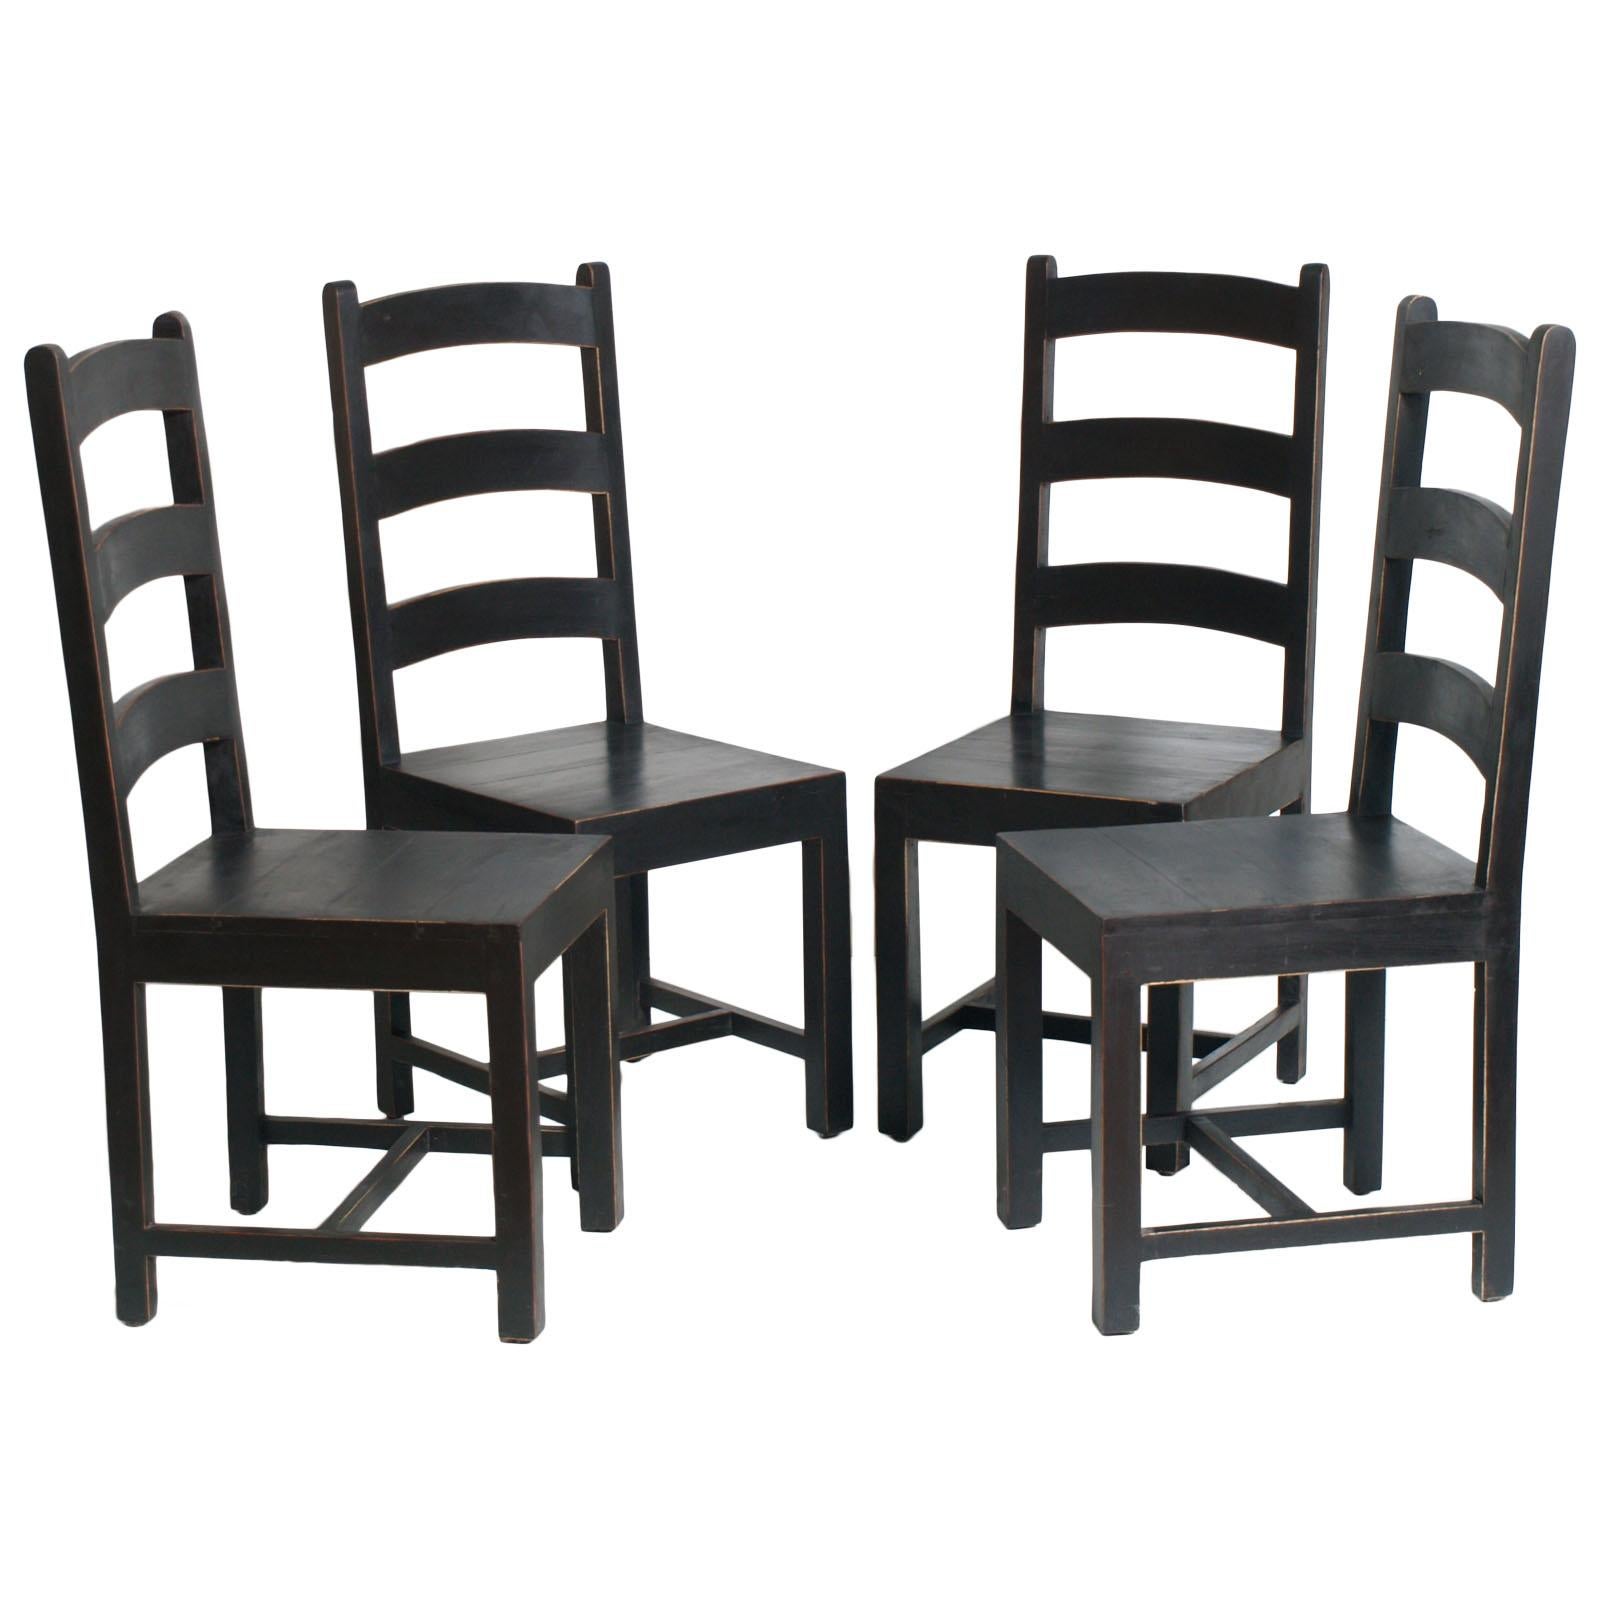 Solid Country Art Deco Four Chairs in Ebonized Oak Restored and Wax-Polished For Sale